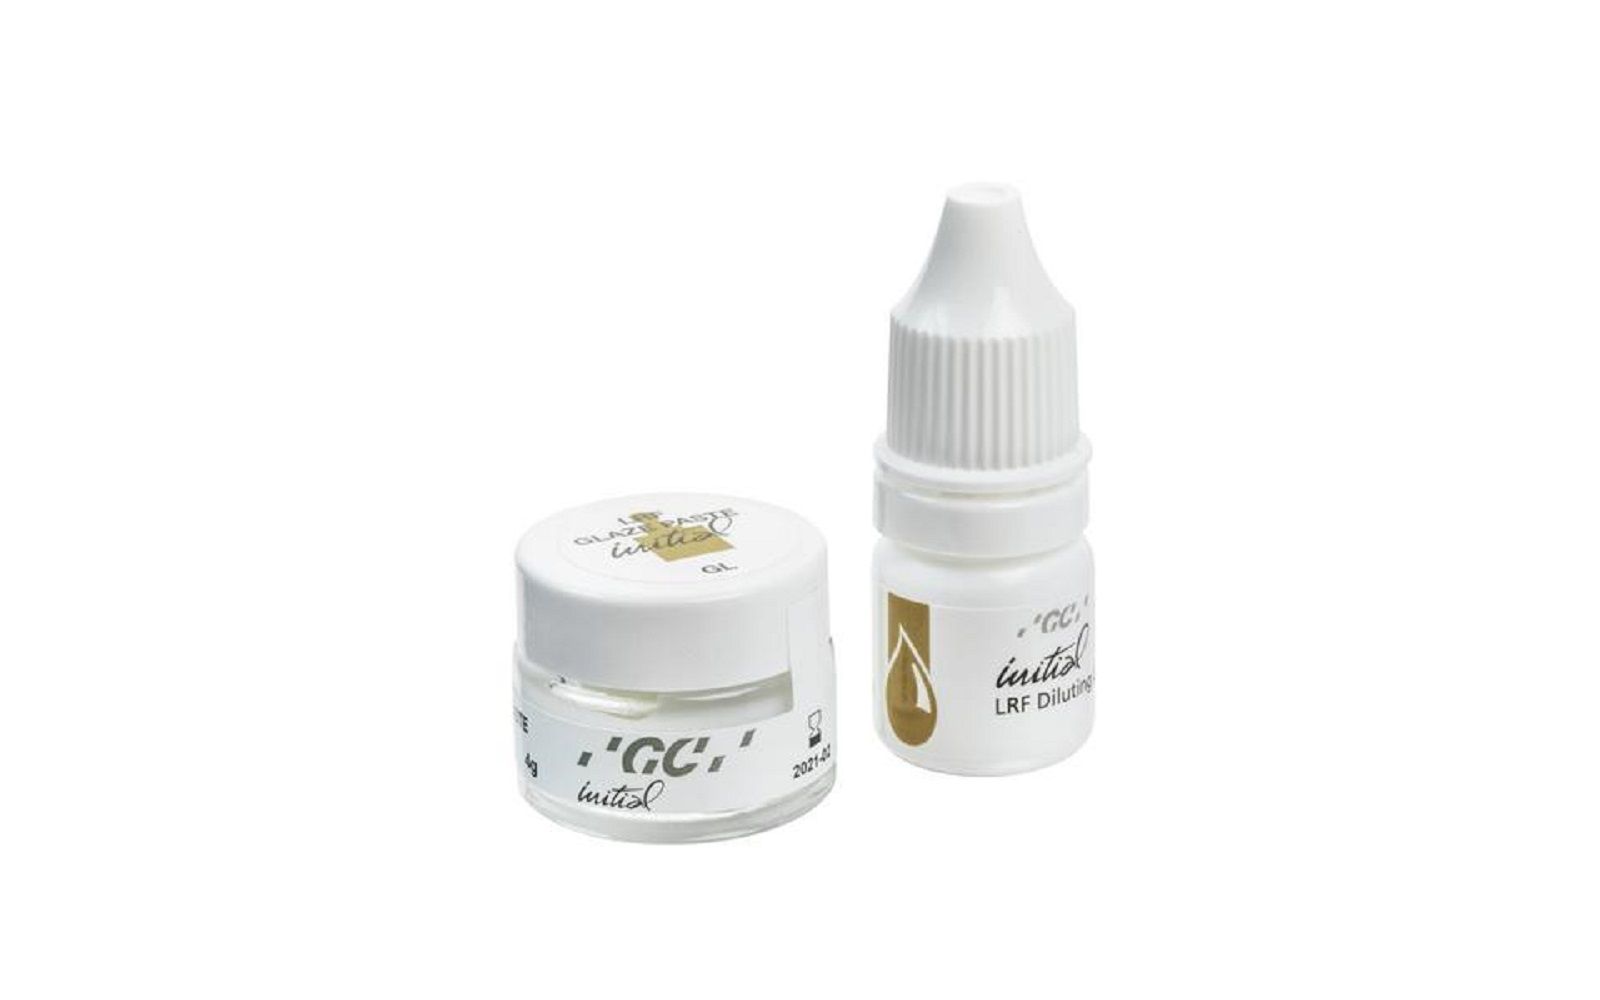 Gc initial™ lrf glaze and paste